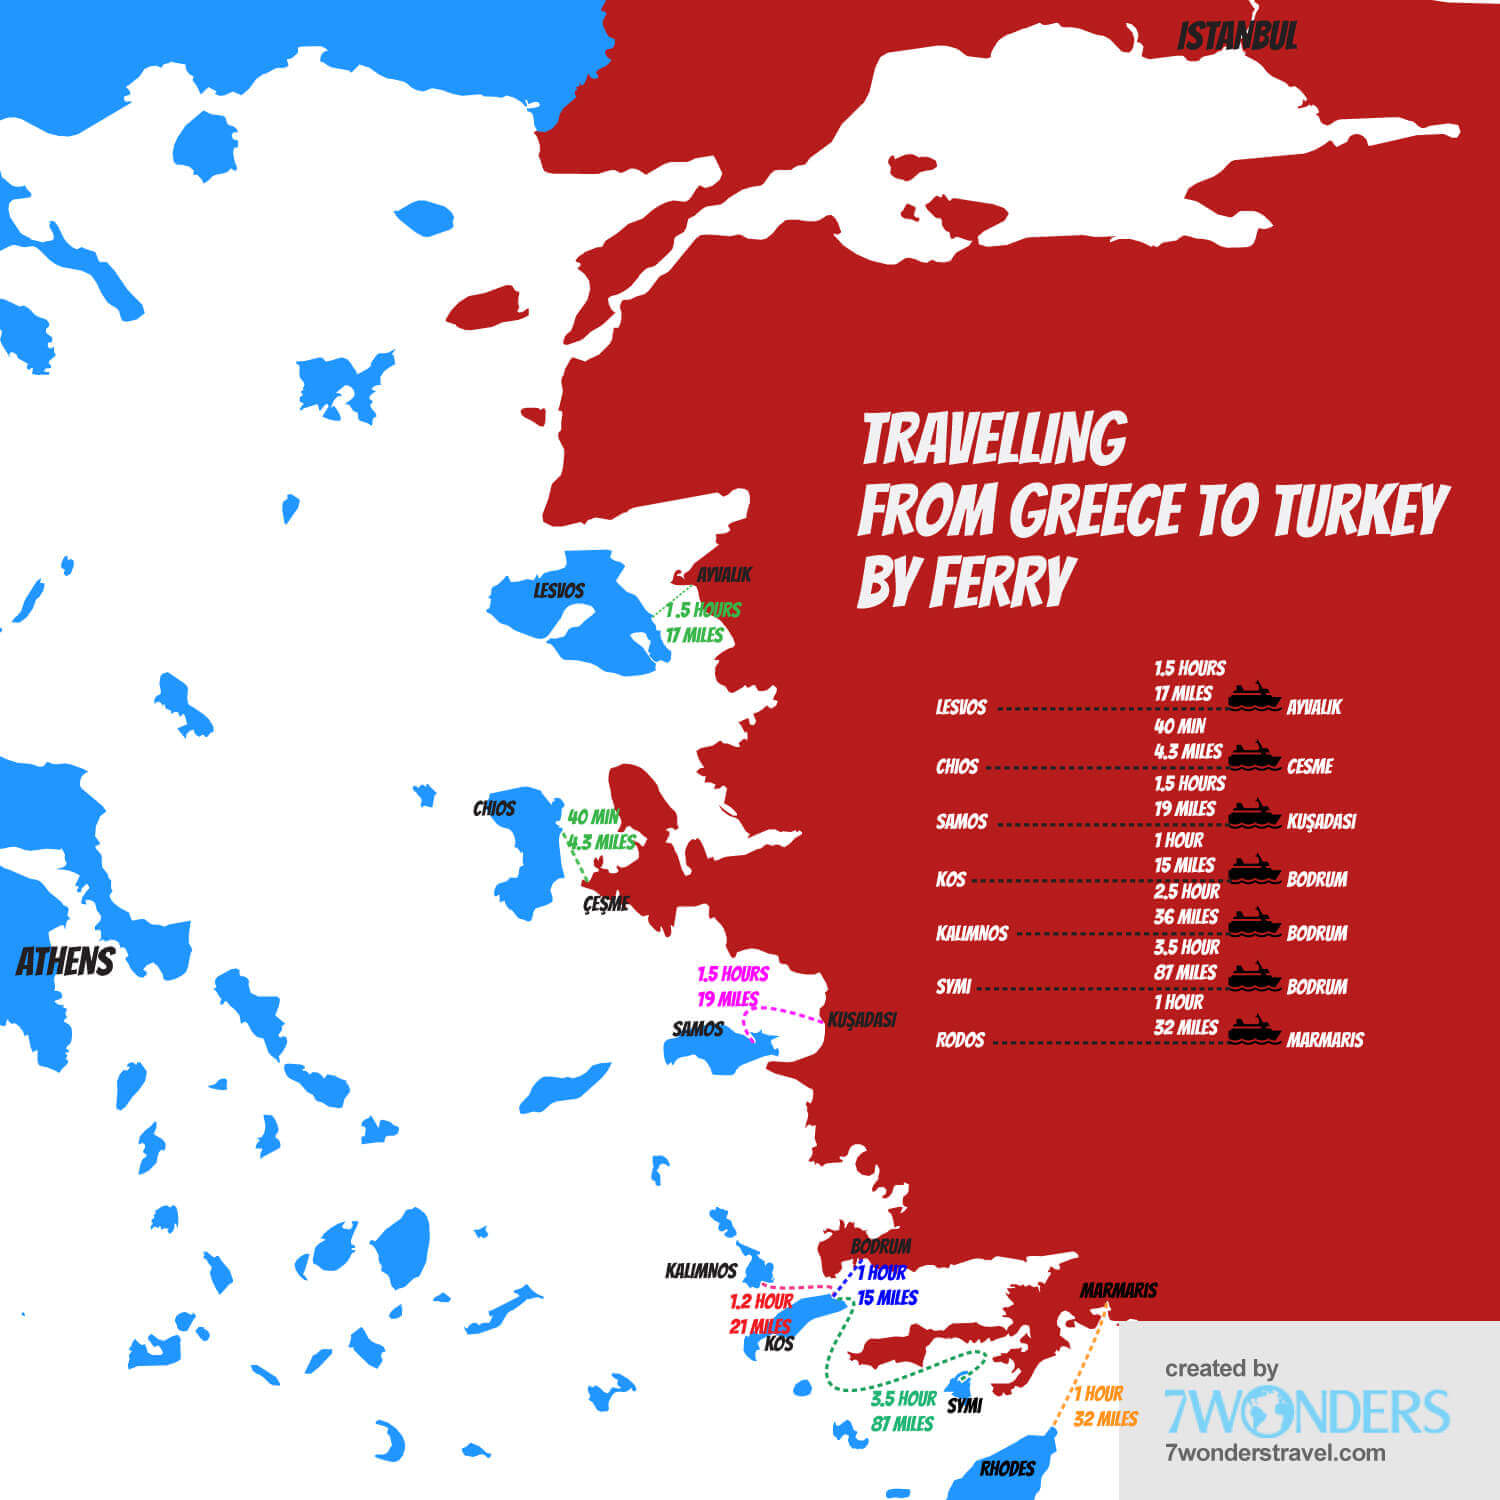 Turkey Greece Ferry Connections Infographic